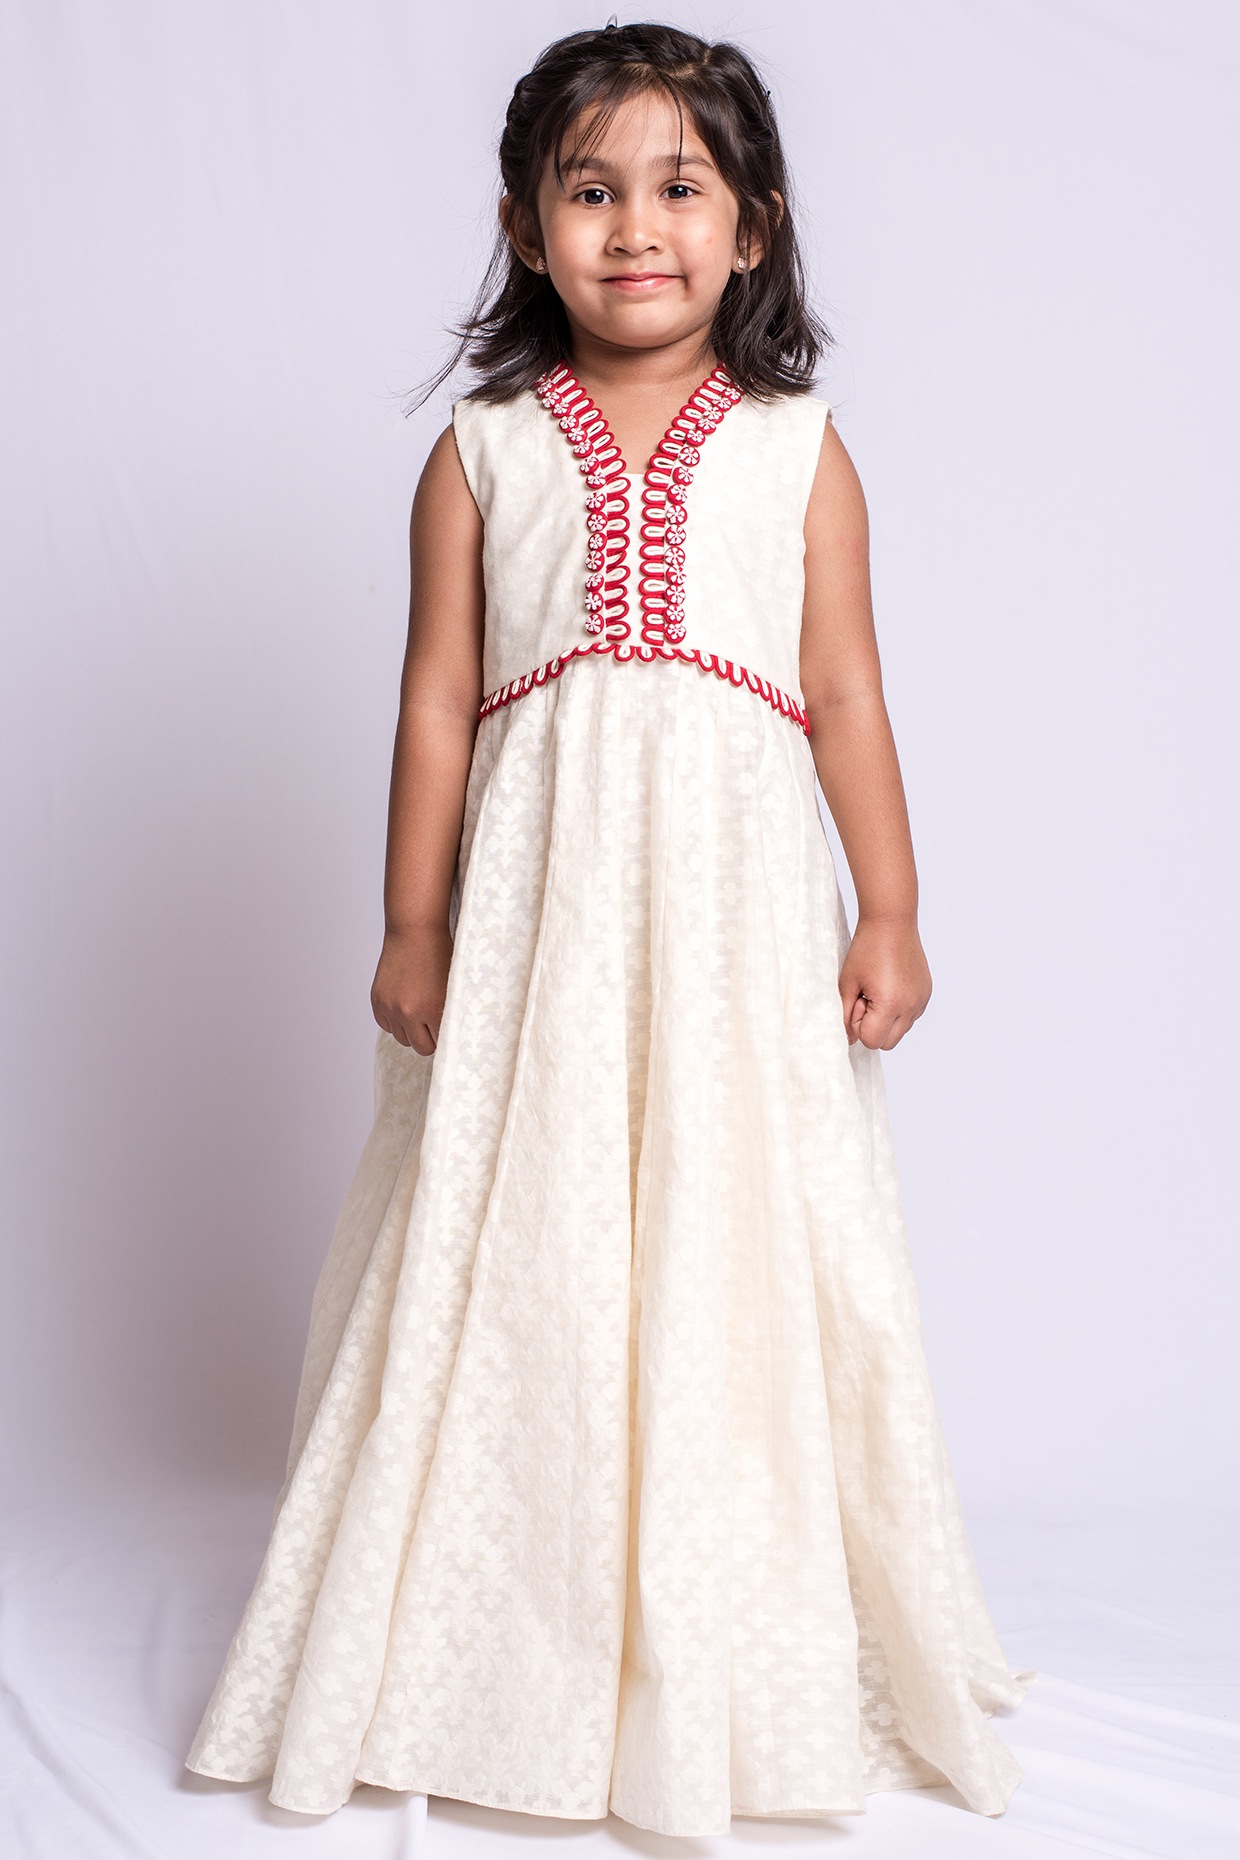 Kids Anarkali Suits In Gurgaon (Gurgaon) - Prices, Manufacturers & Suppliers